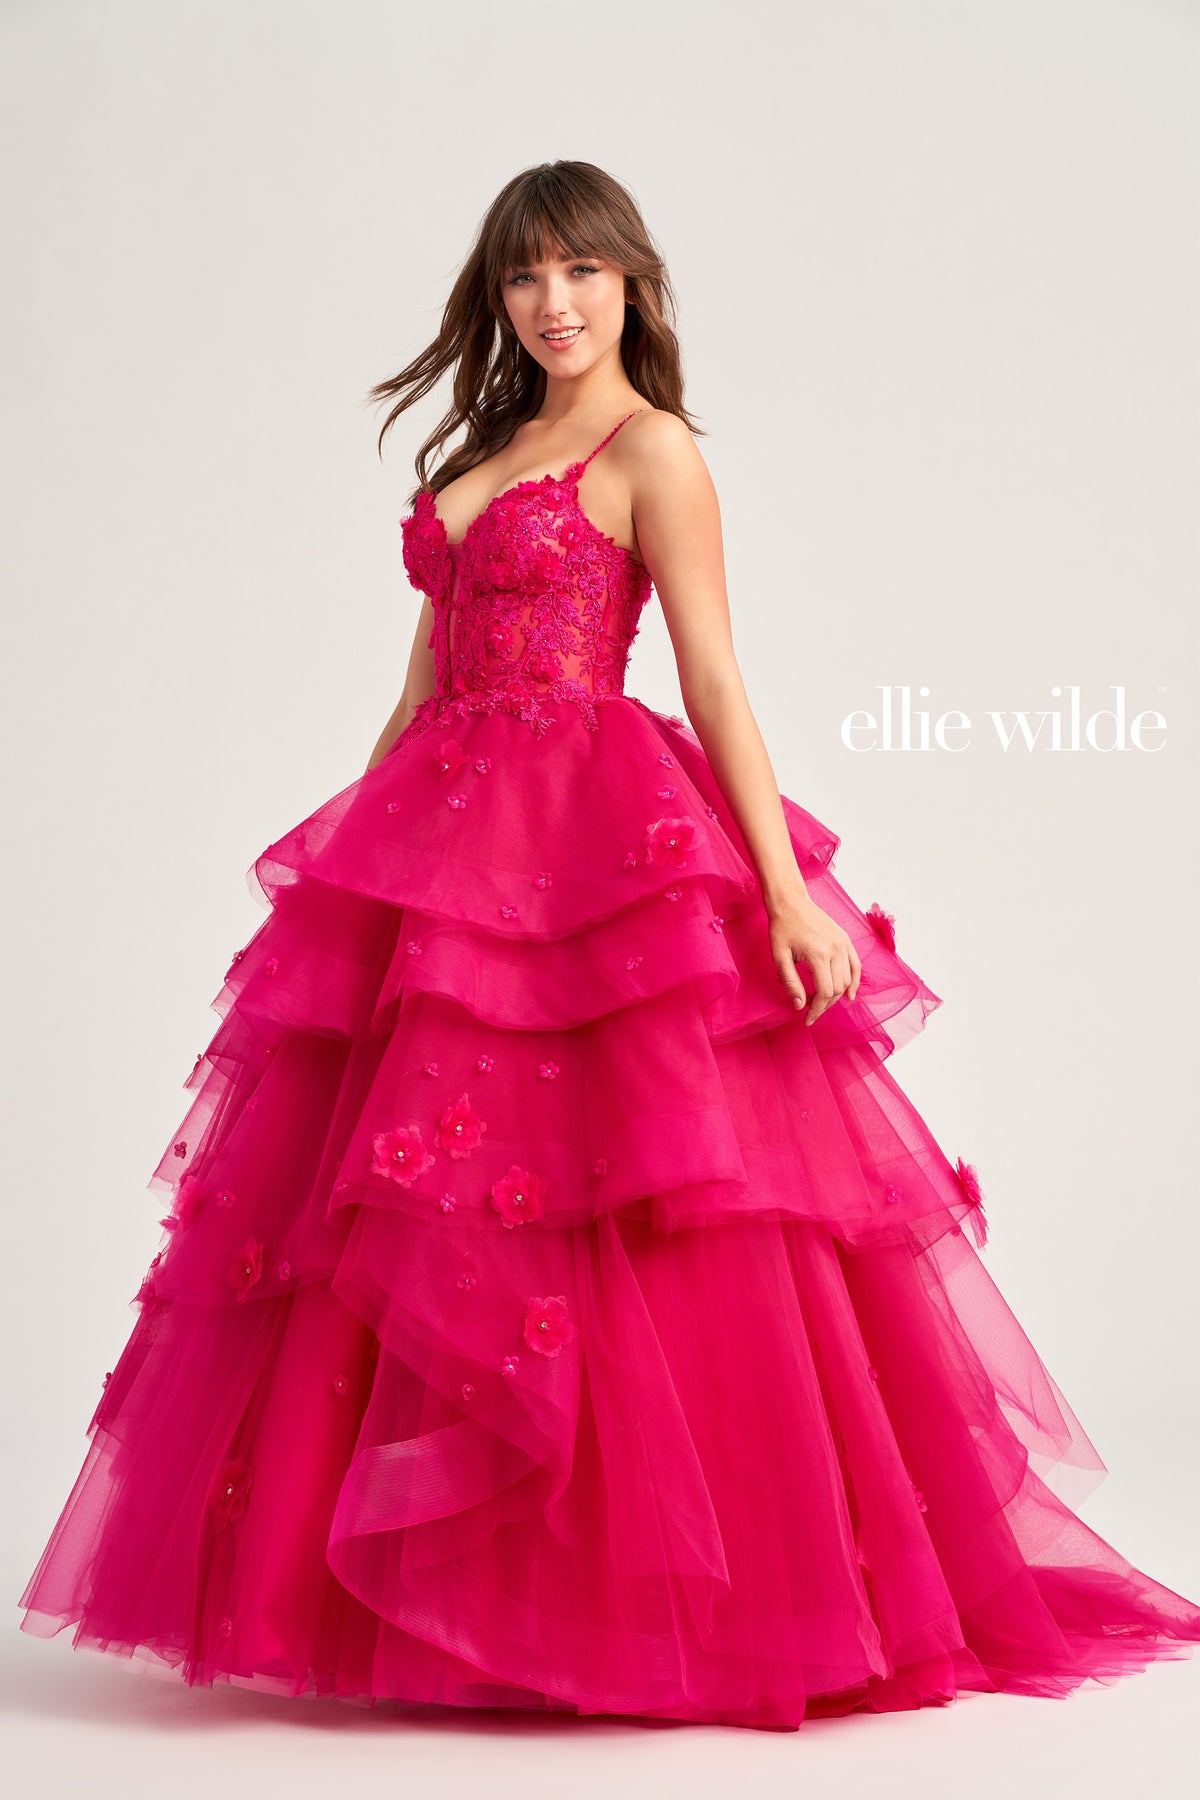 3D Floral Applique Layered Ball Gown